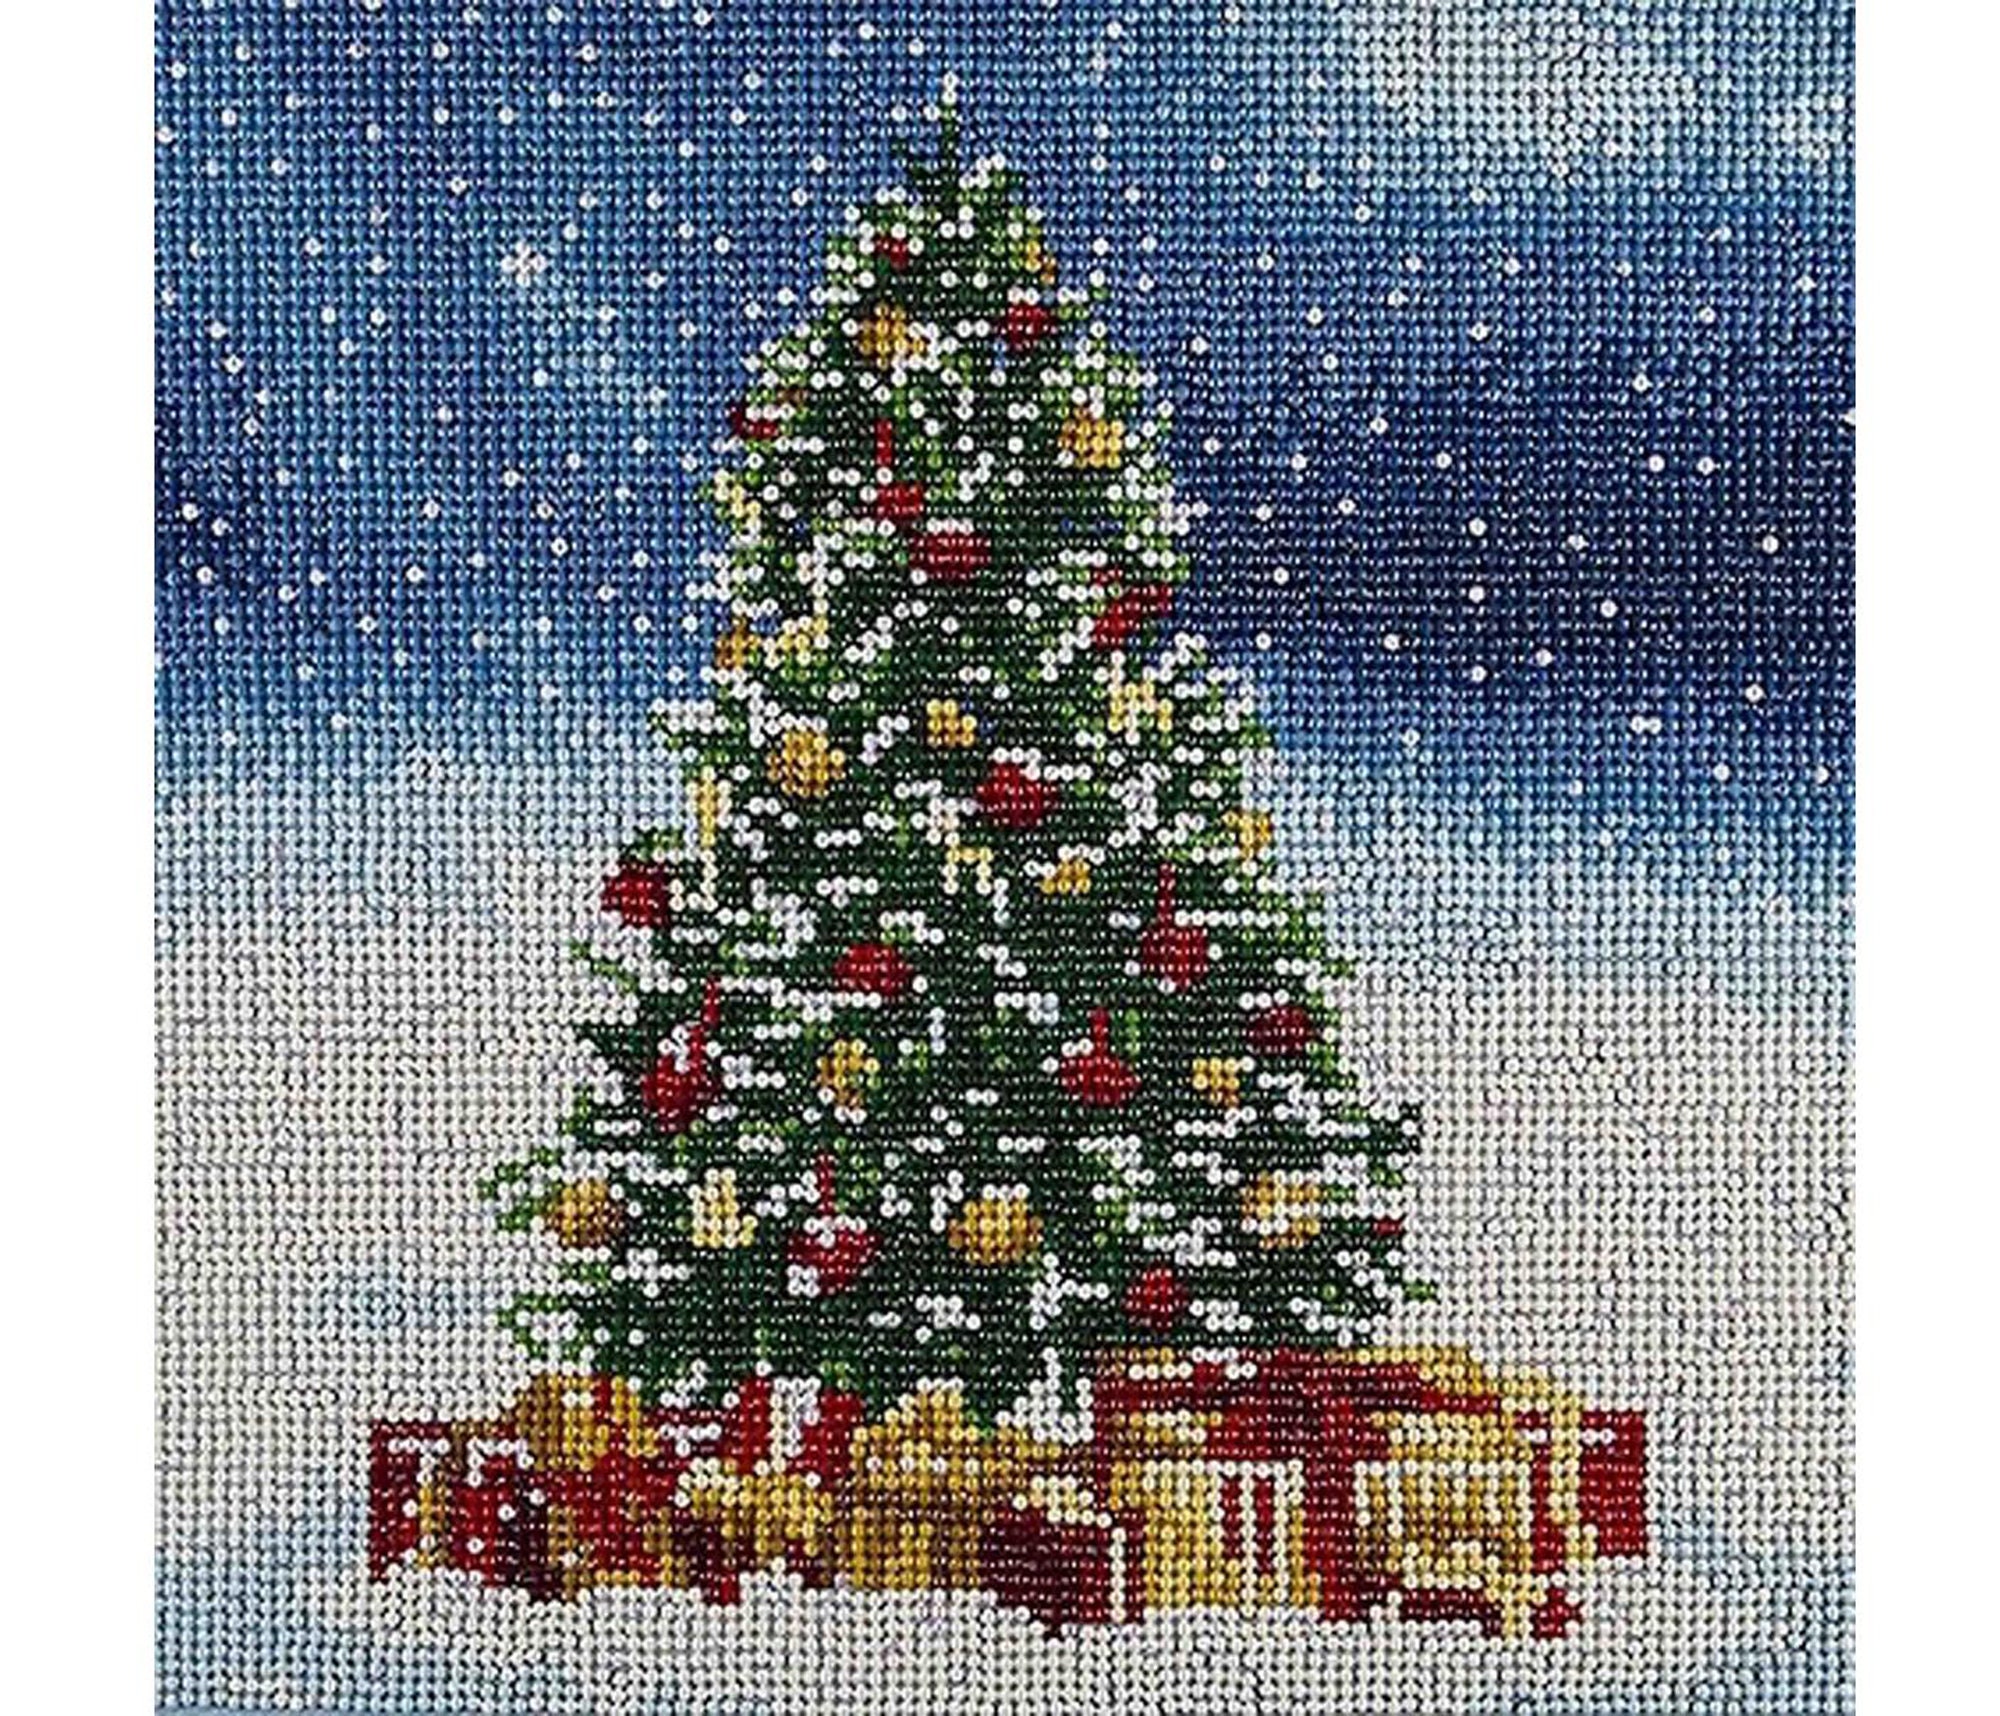 Diamond painting kit - Fantest wood Embroidery Mosaic Cross Stitch Full  Square - Price, description and photos ➽ Inspiration Crafts